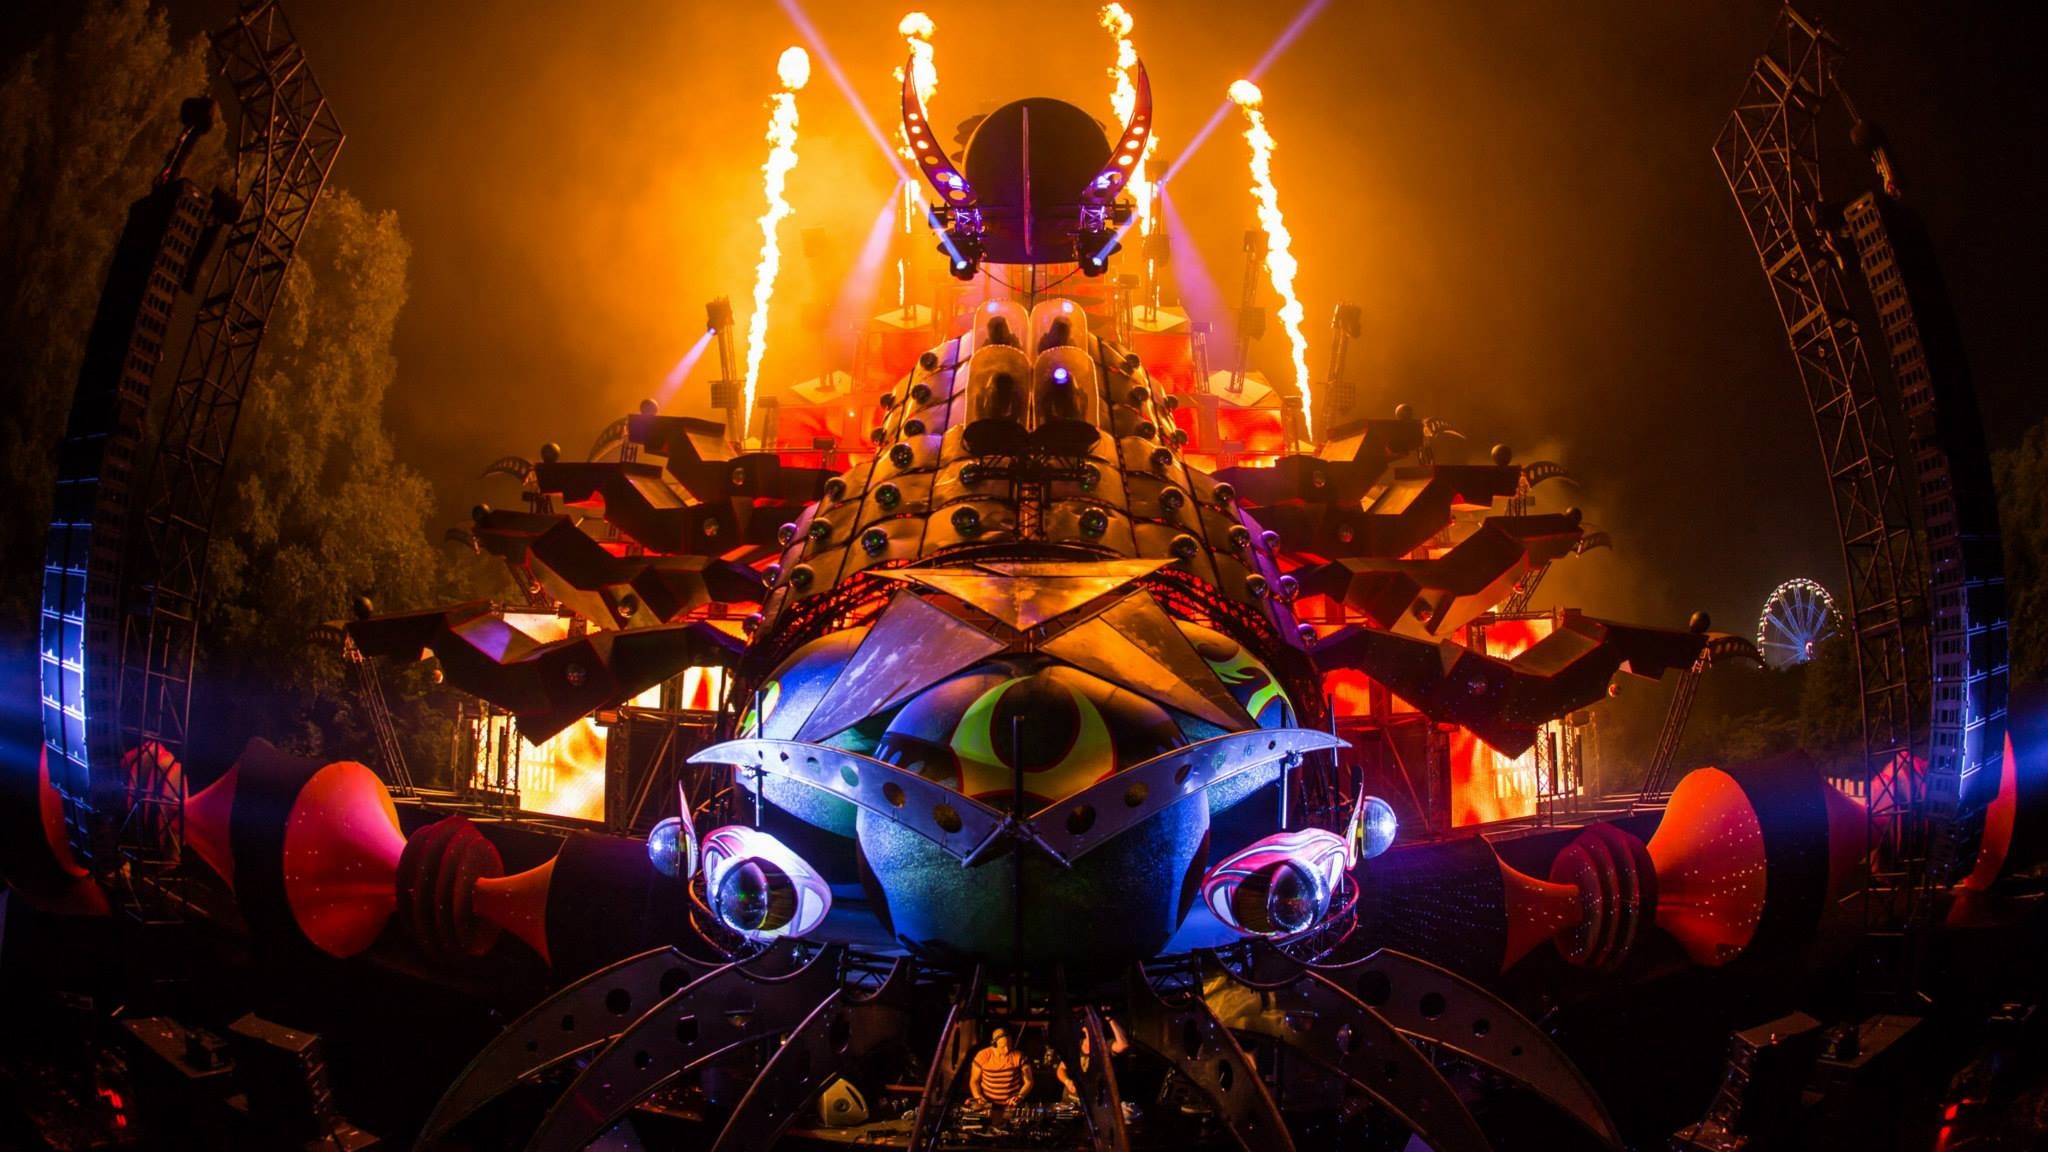 2048x1152 Eye candy: 40+ photos of beautiful EDM festival stage designs .